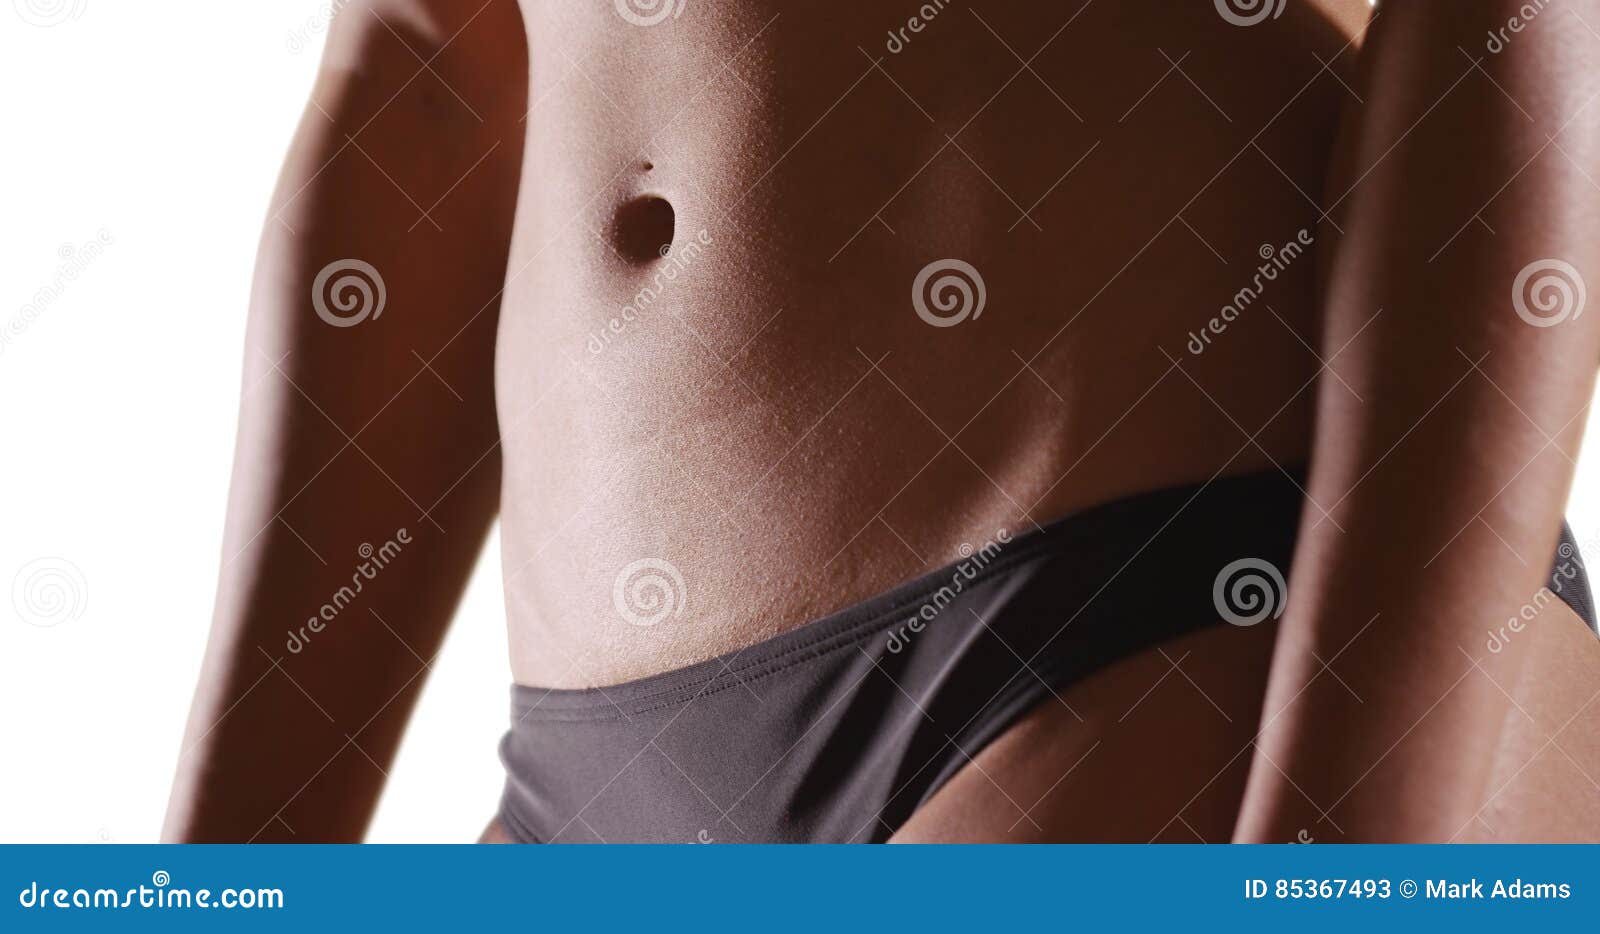 Healthy nutrition and belly health concept. Close up of woman flat